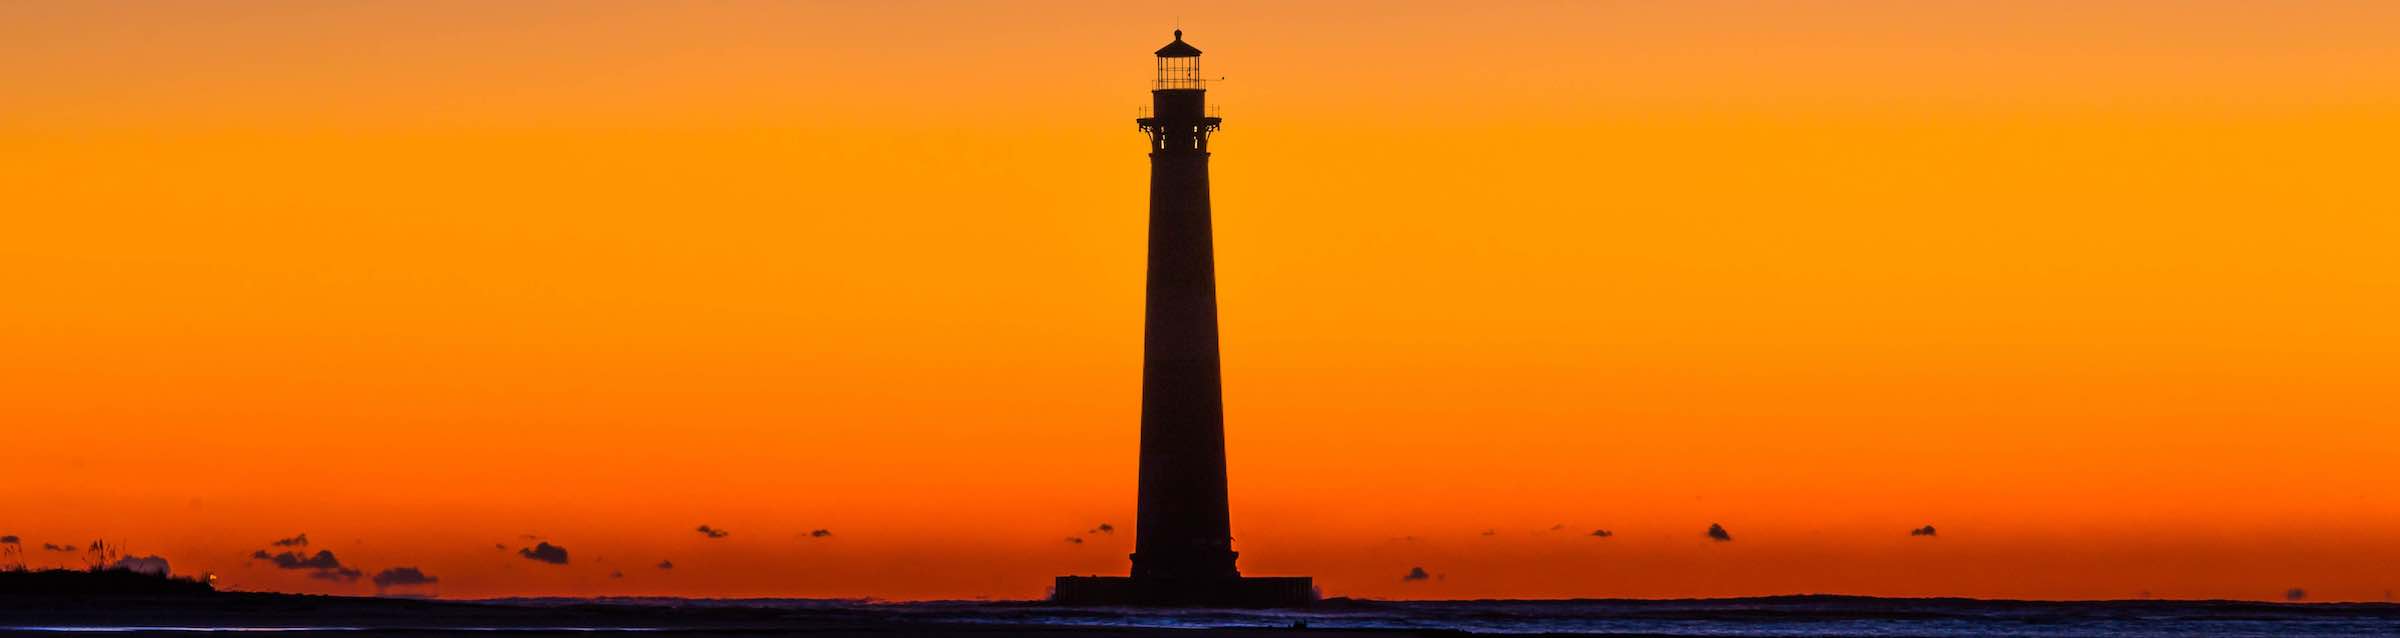 The Morris Island Lighthouse at sunset